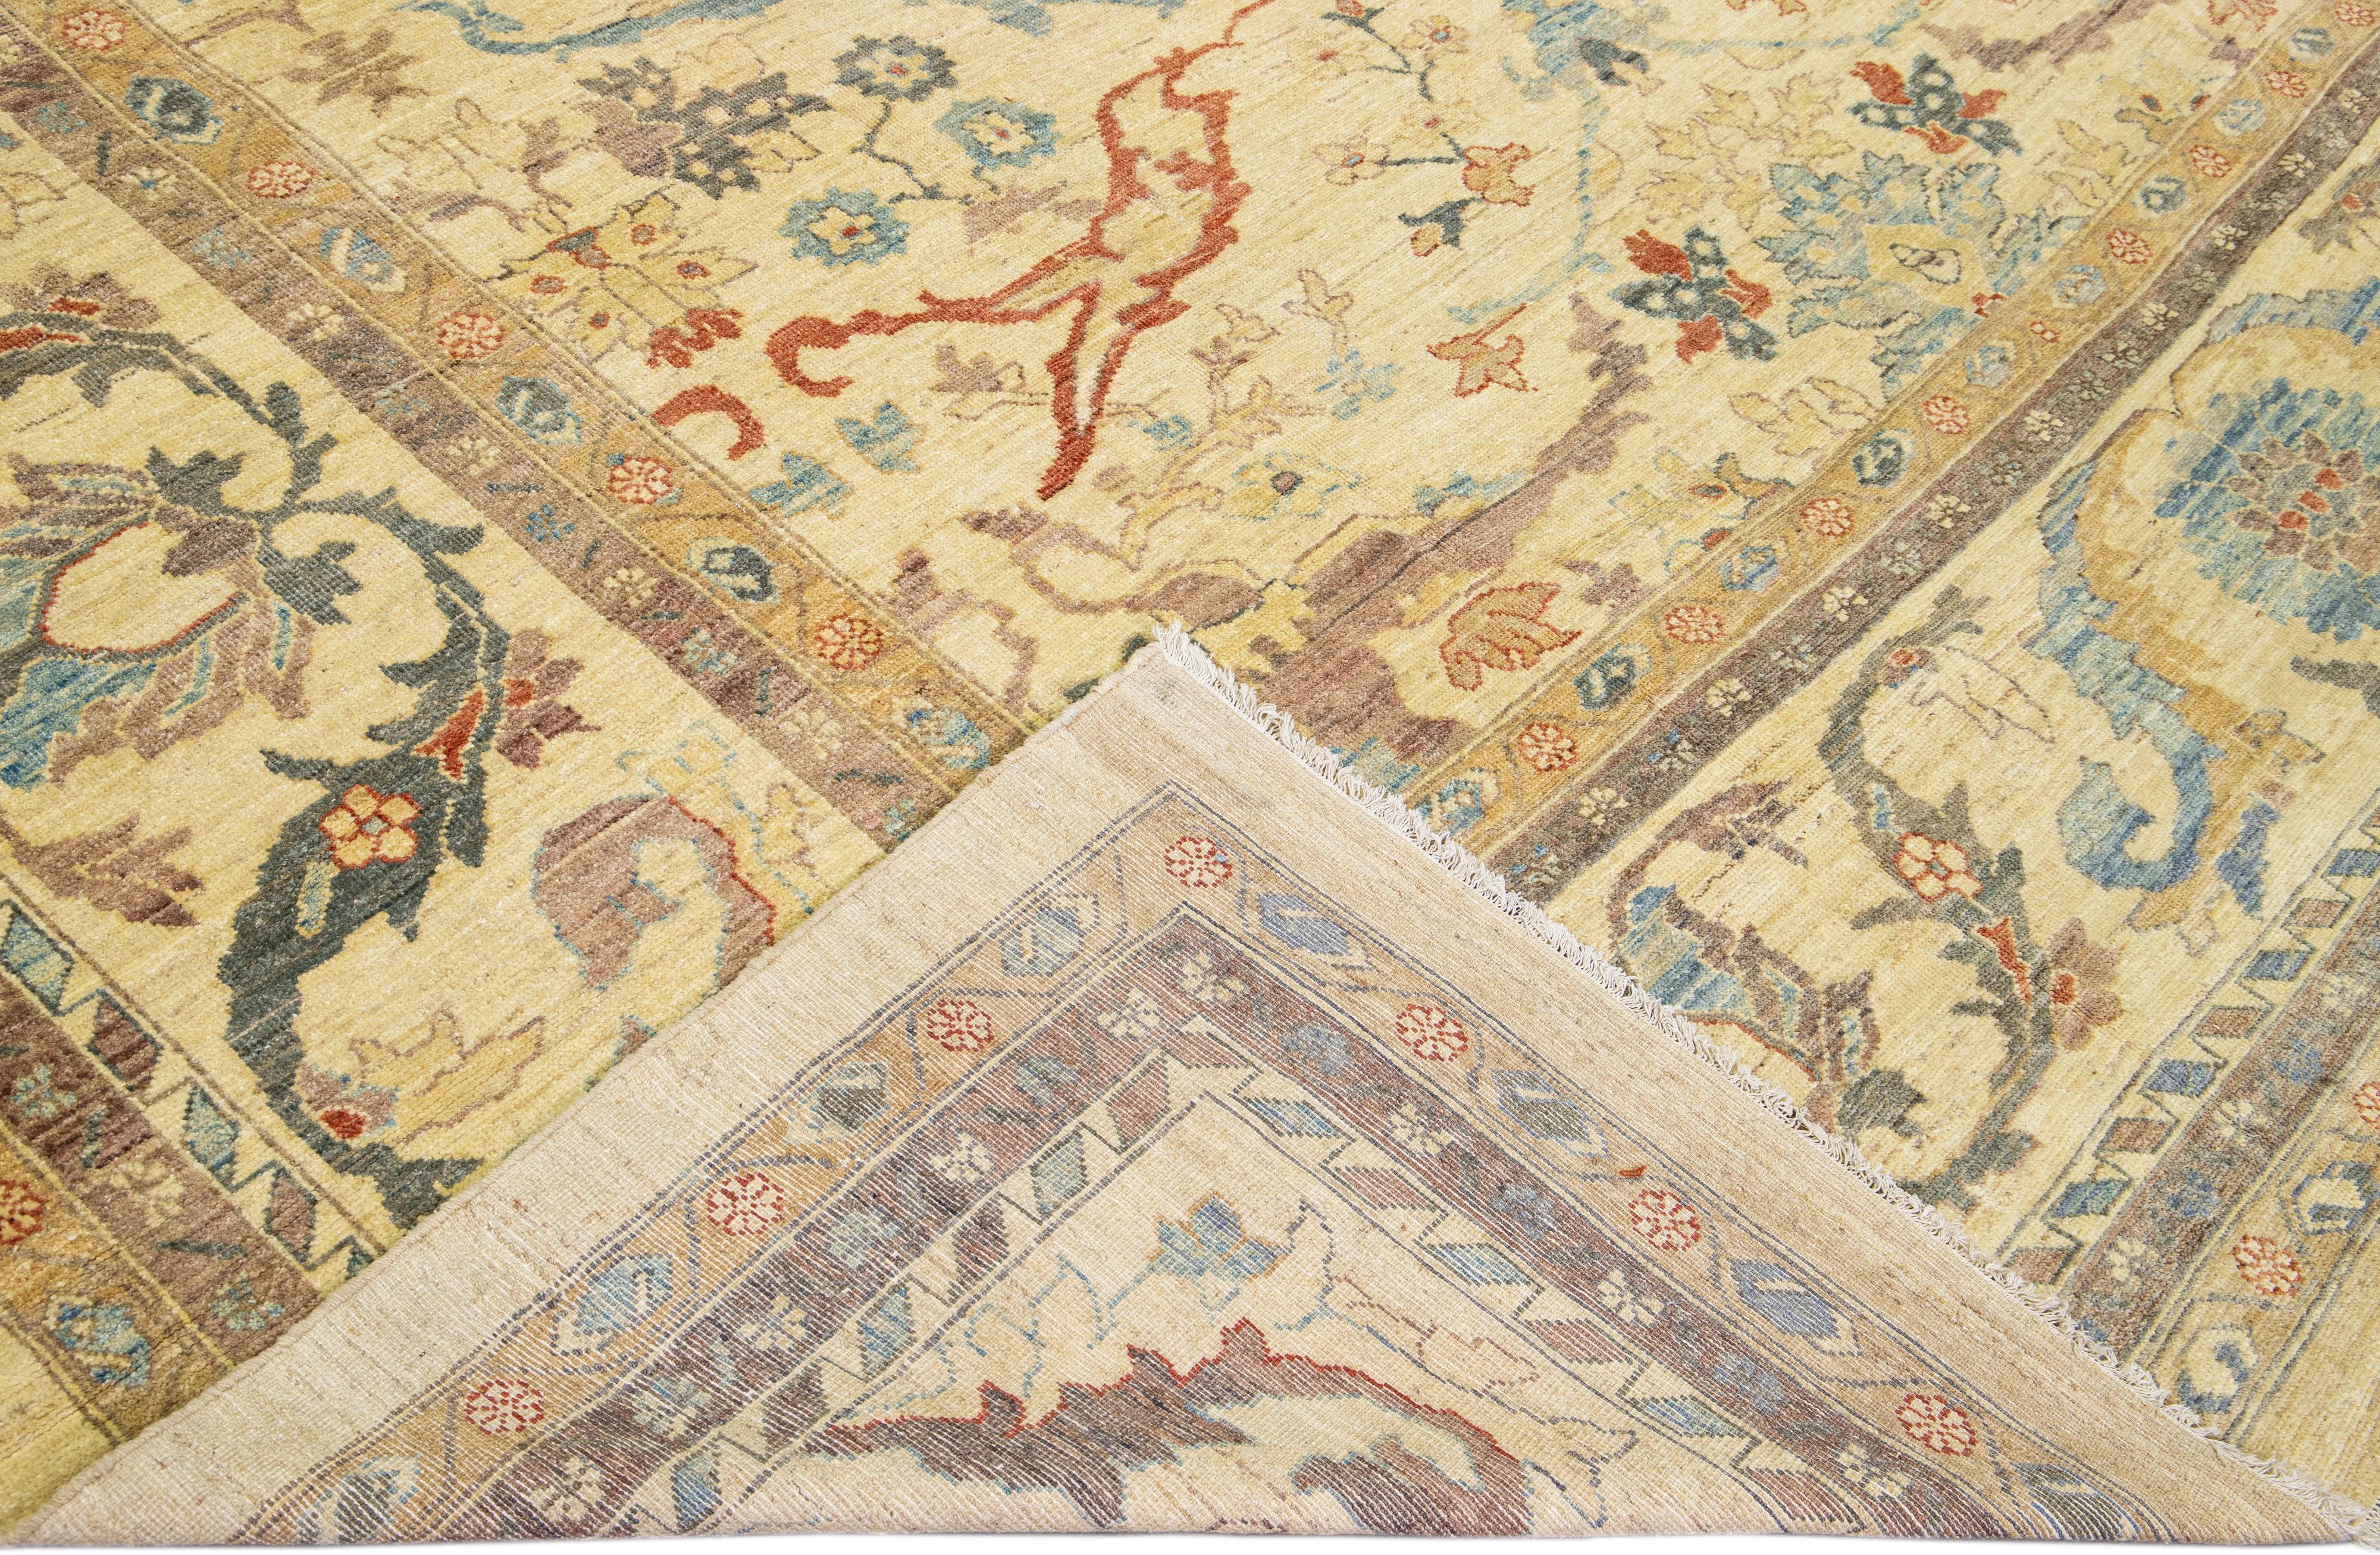 Beautiful modern Sultanabad hand-knotted wool rug with a beige field. This Sultanabad rug has brown, goldenrod, and blue accents in a gorgeous all-over classic floral pattern design.

This rug measures: 13'5